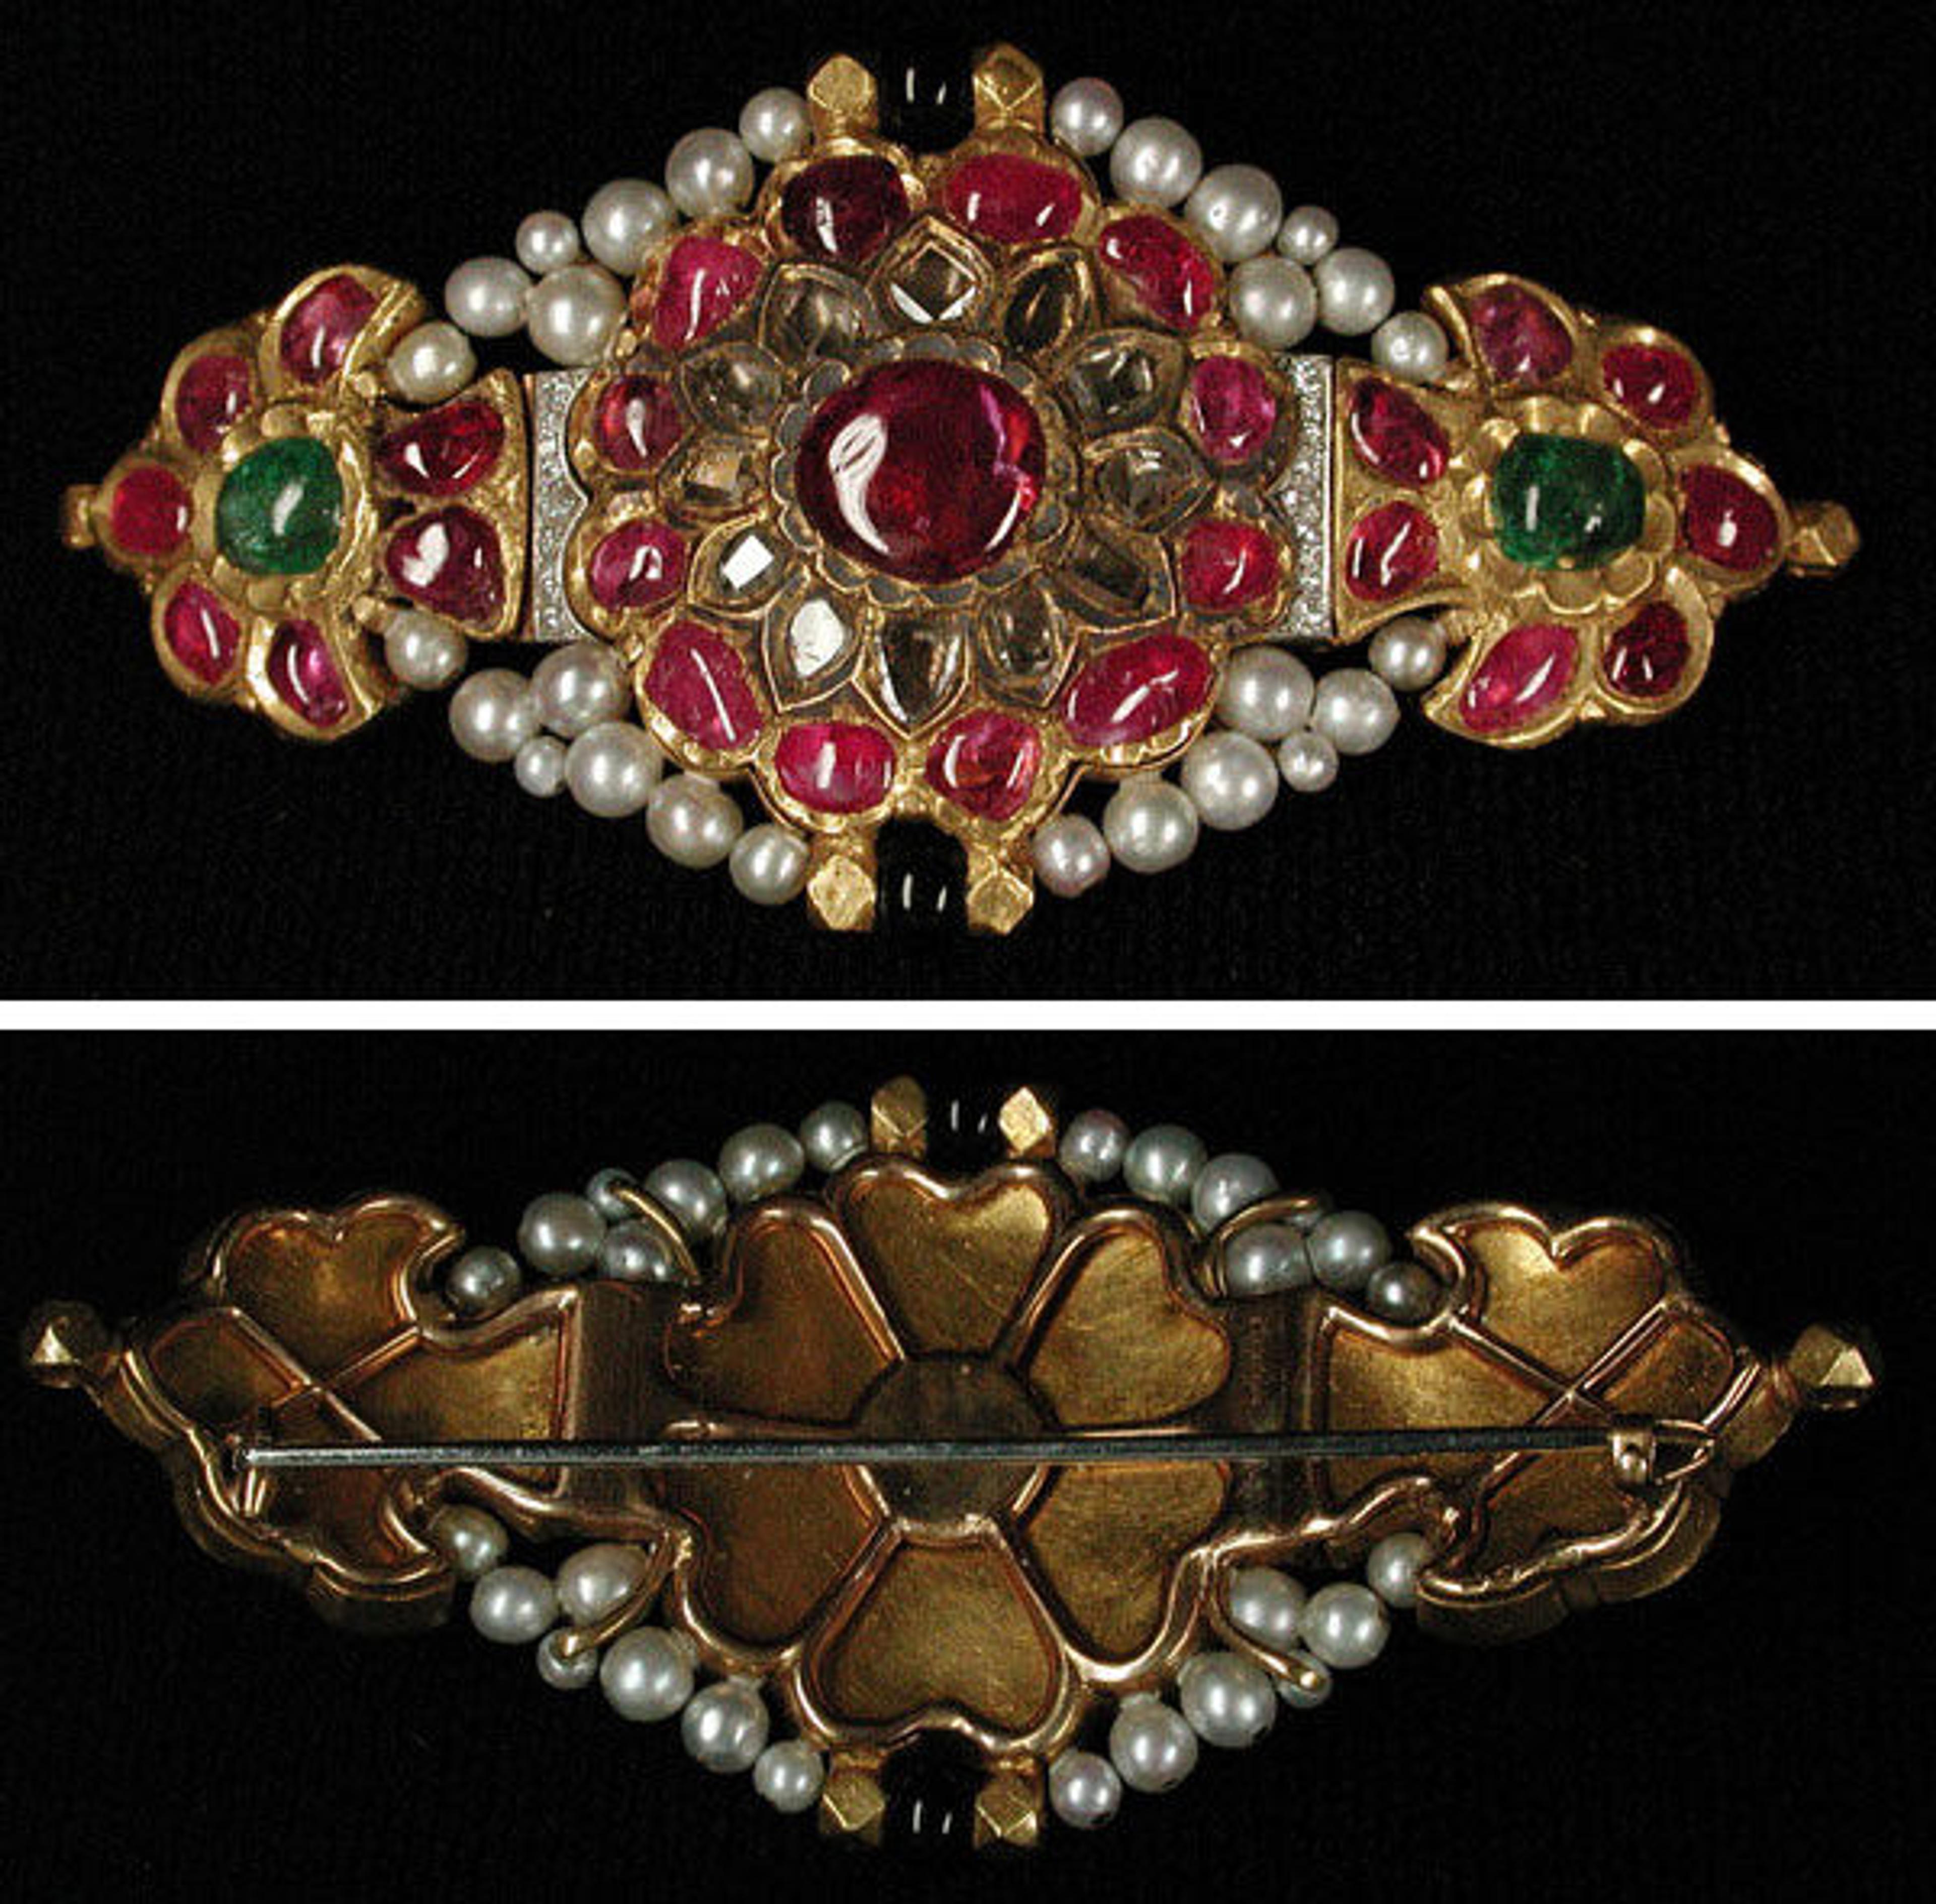 Centerpiece from an armlet (bazuband) later made into a brooch